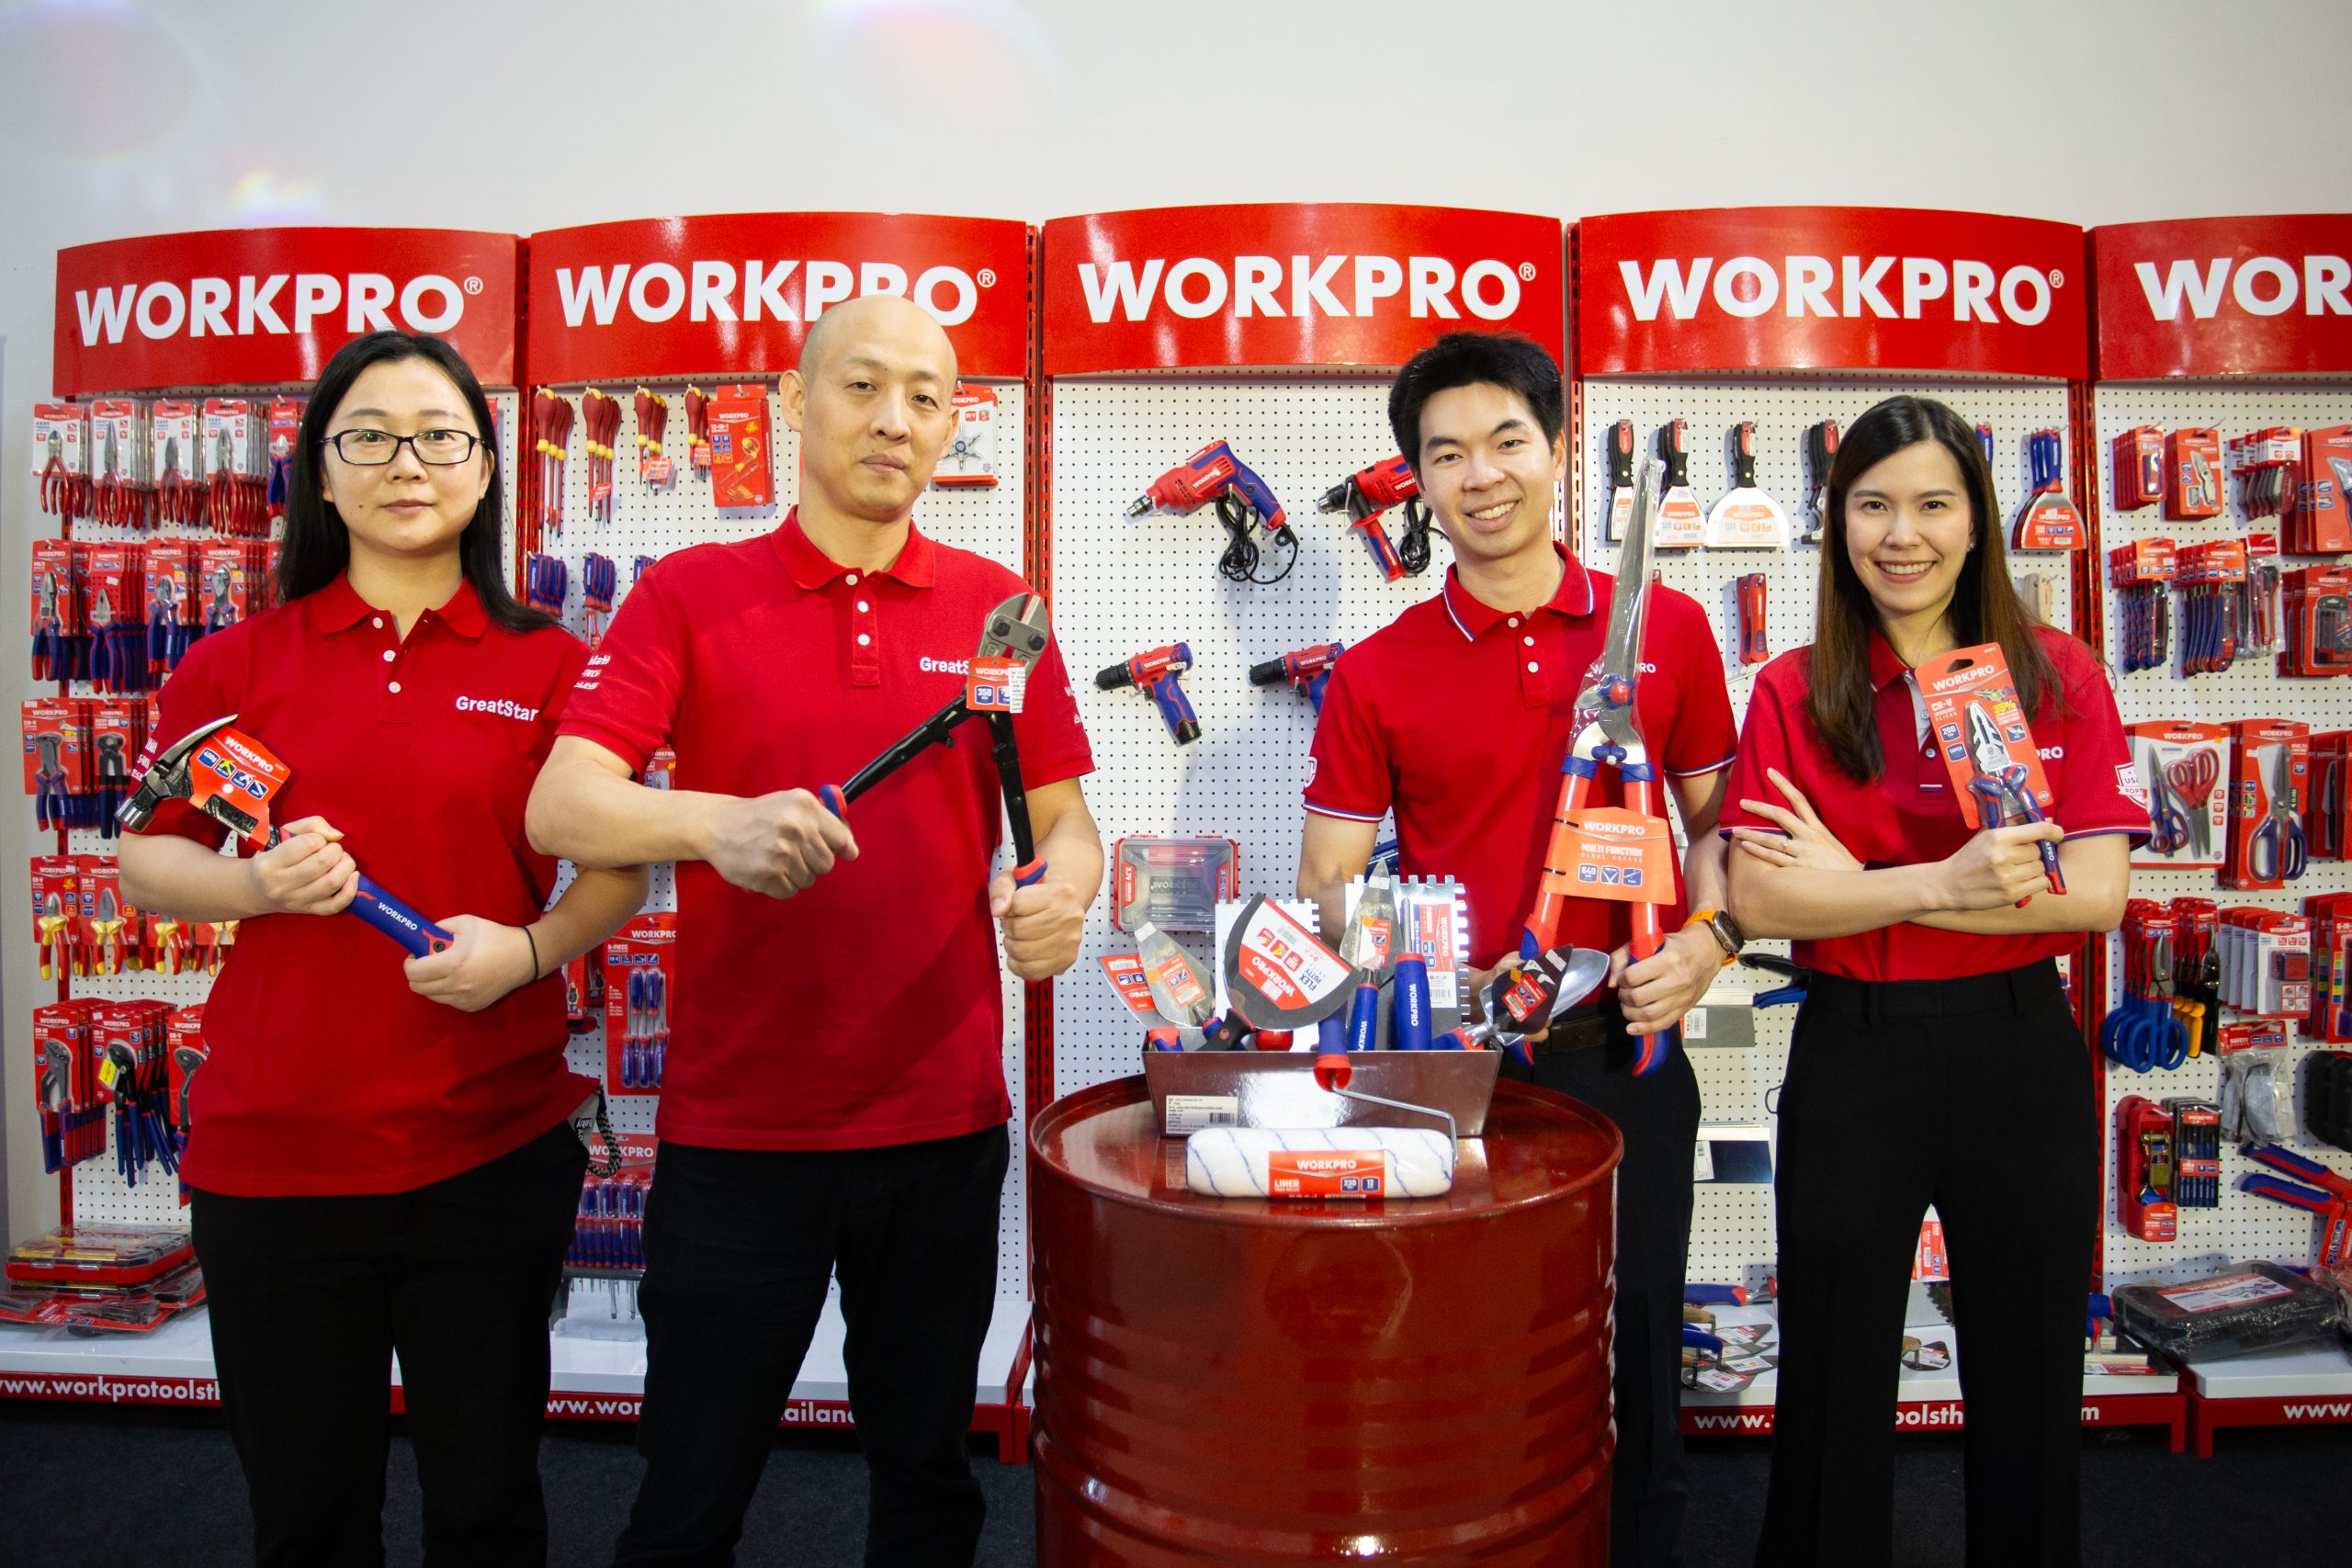 SangchaiGroup Hosts WORKPRO CONFERENCE Showcasing Innovations and Opening Nationwide Dealer Applications